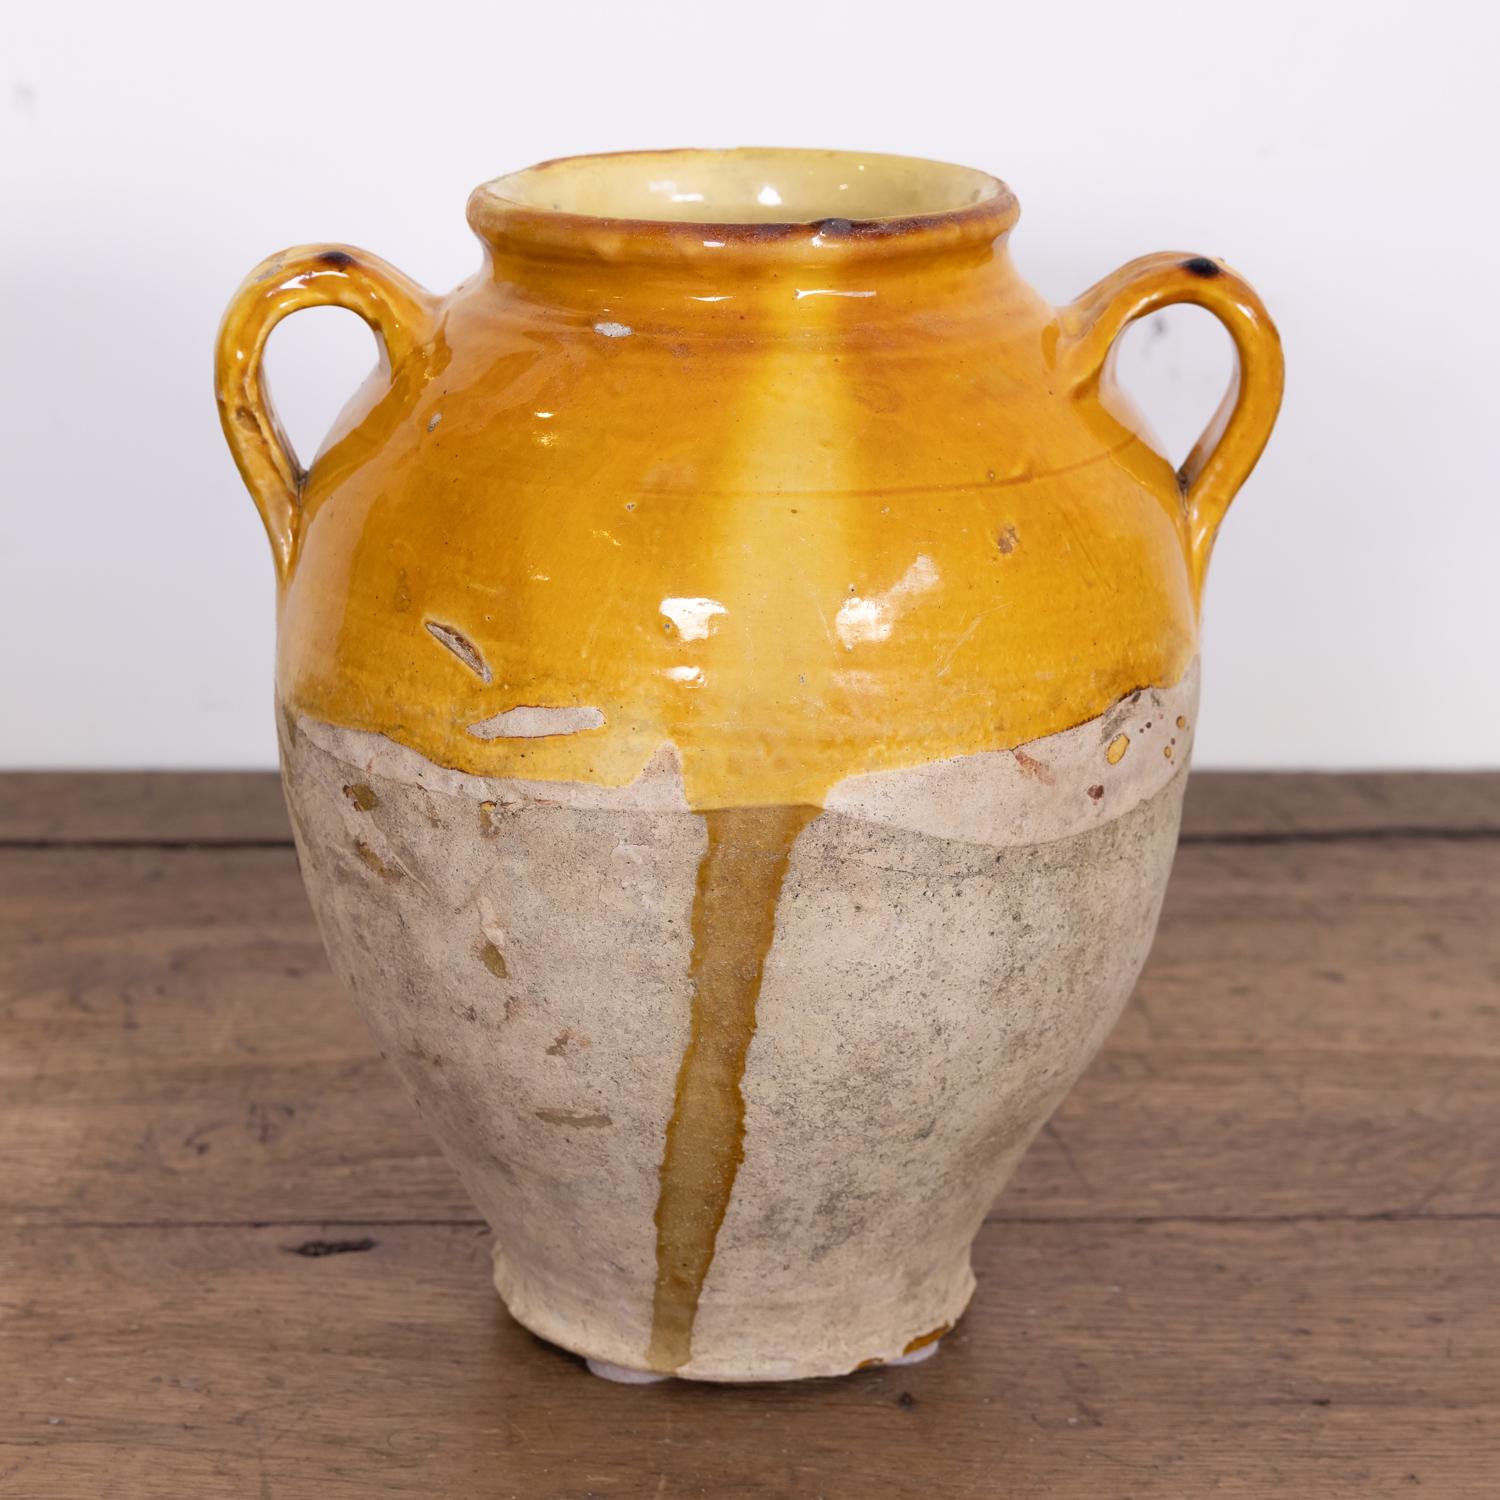 Antique French pot de confit or confit pot from southwest France having two handles and a luminous yellow glaze, circa 1880s. This utilitarian earthenware vessel was considered a staple in 19th century France, especially in kitchens found in the